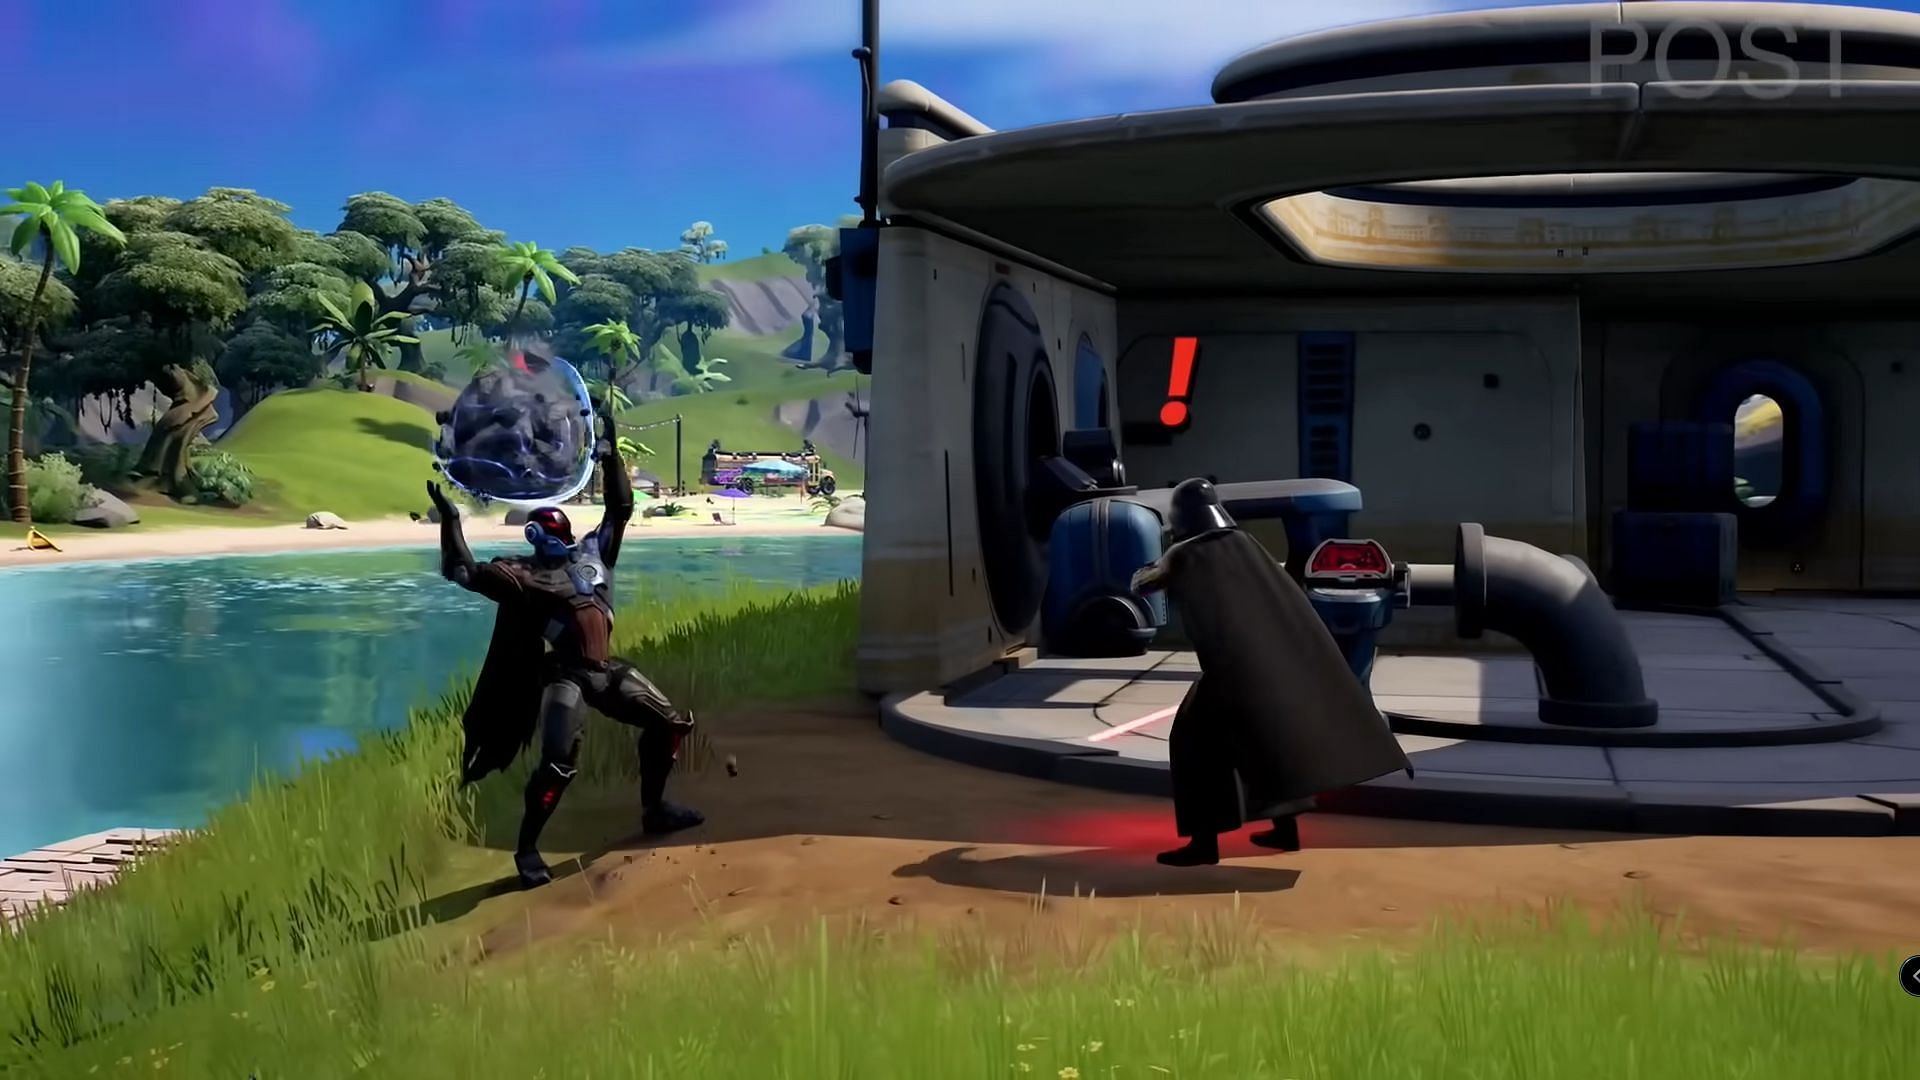 Watching Darth Vader fight The Foundation in Fortnite is a surreal experience (Image via YouTube/By Post)